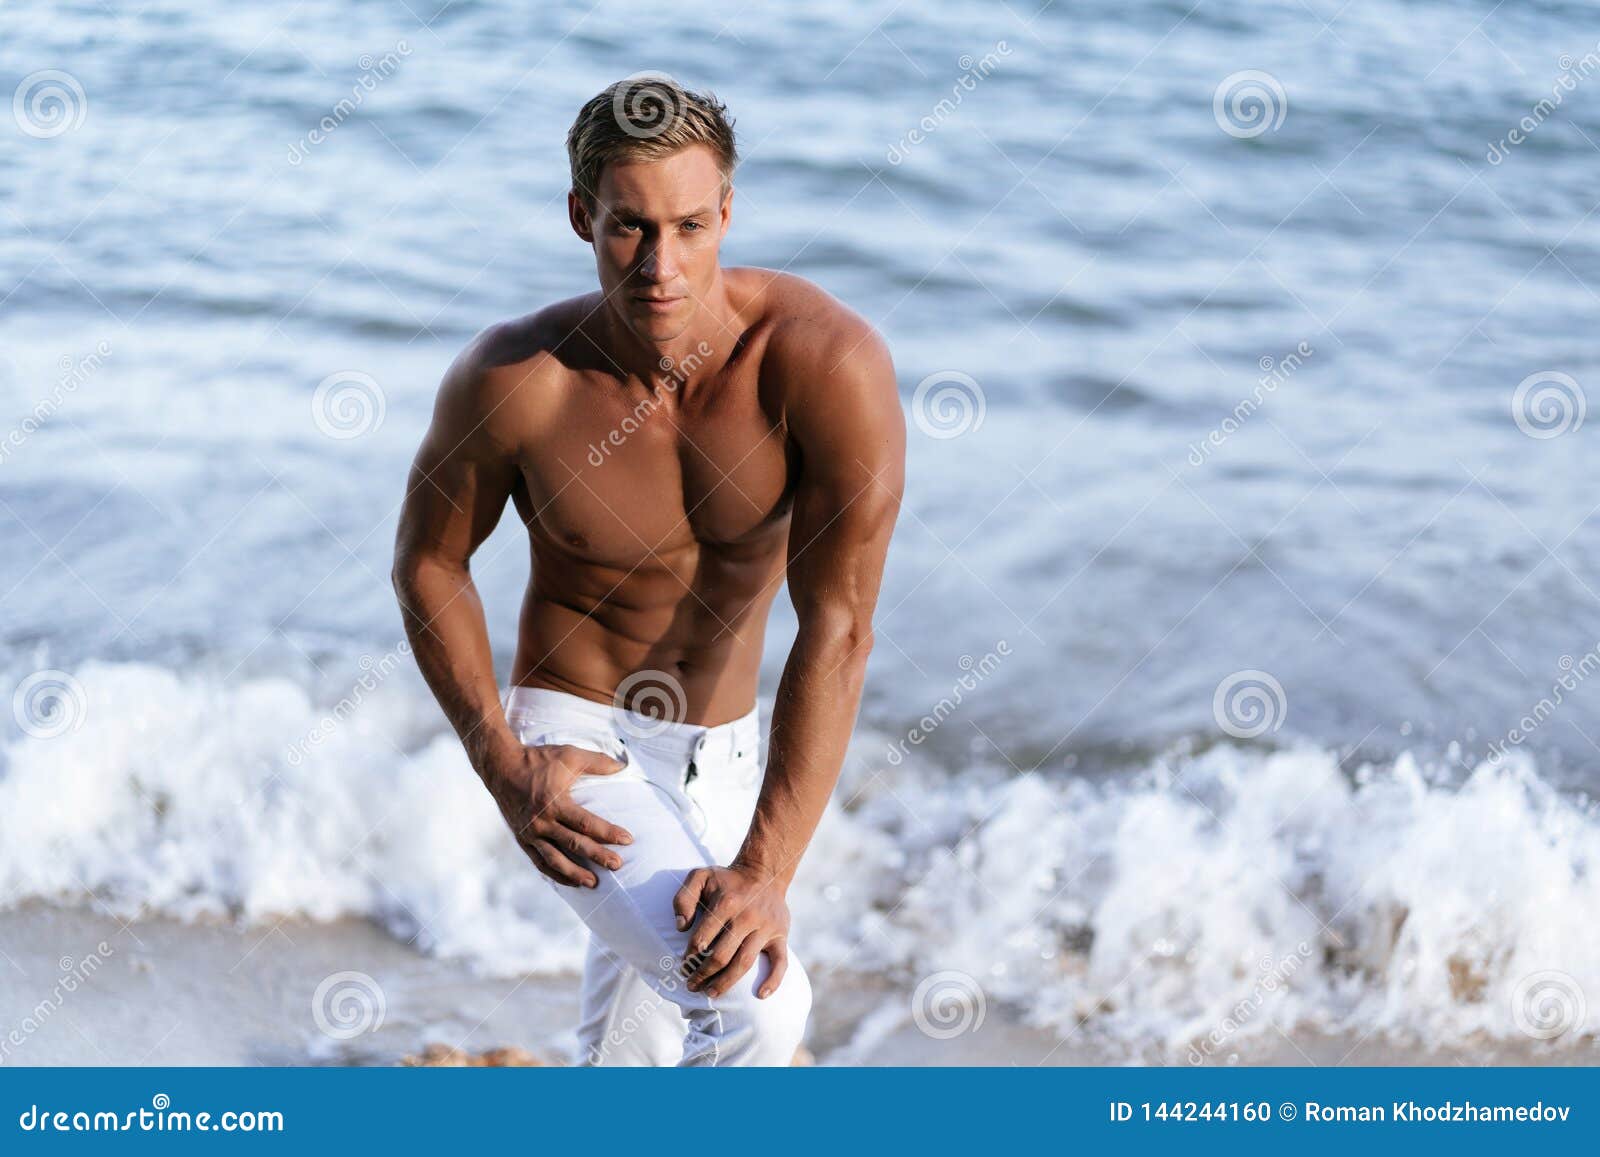 Shirtless on a beach stock photo. Image of posing, model 